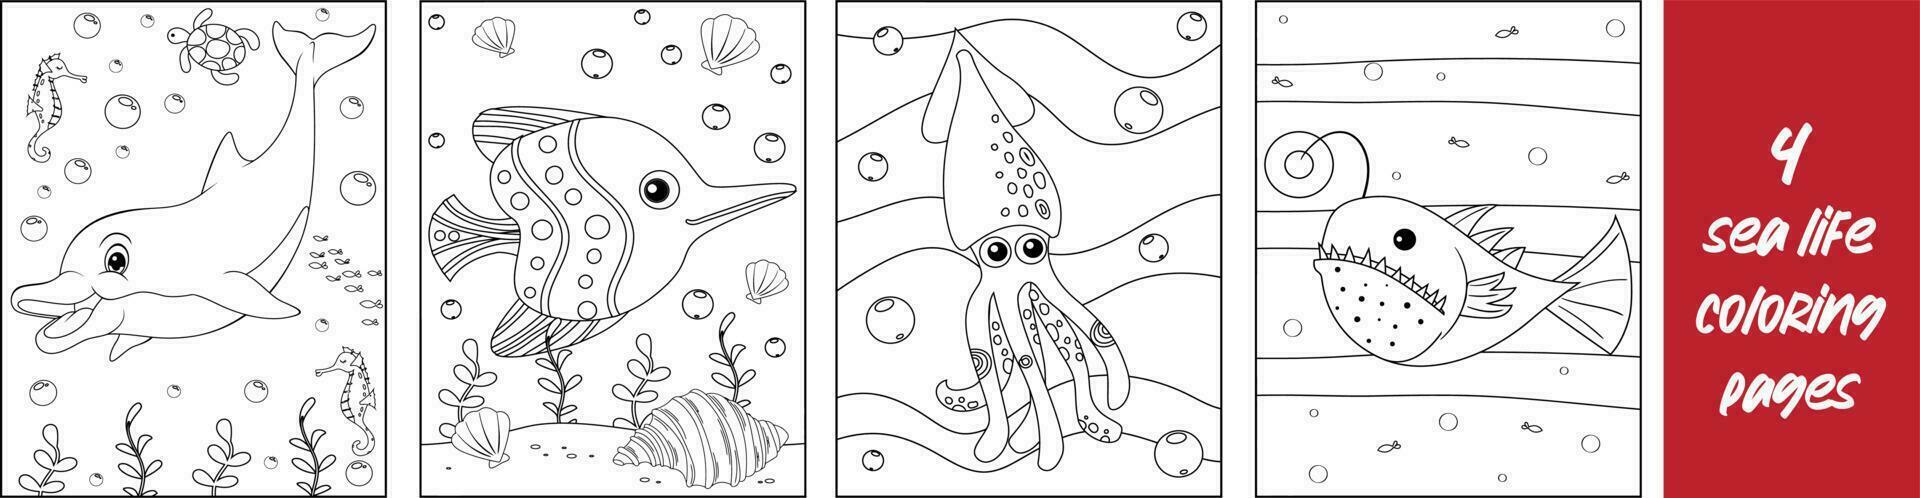 Cute Sea animals group coloring page for kids vector